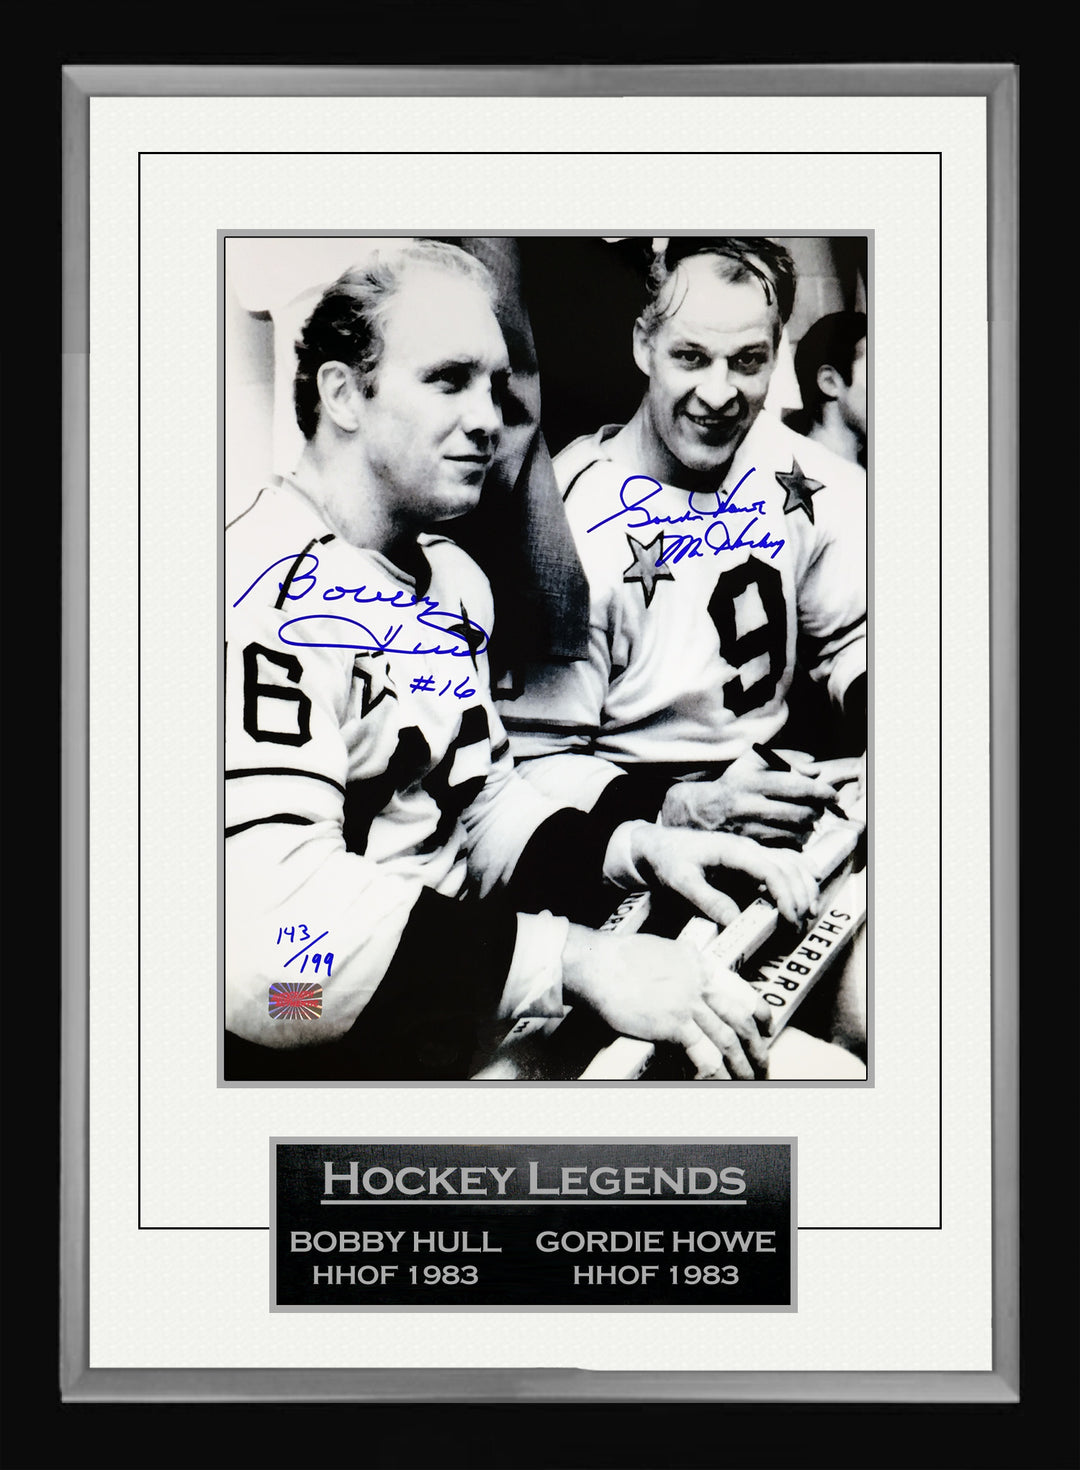 Autographed Bobby Hull & Gordie Howe Limited Edition Of 199, Chicago Blackhawks, NHL, Hockey, Autographed, Signed, AACMH30179